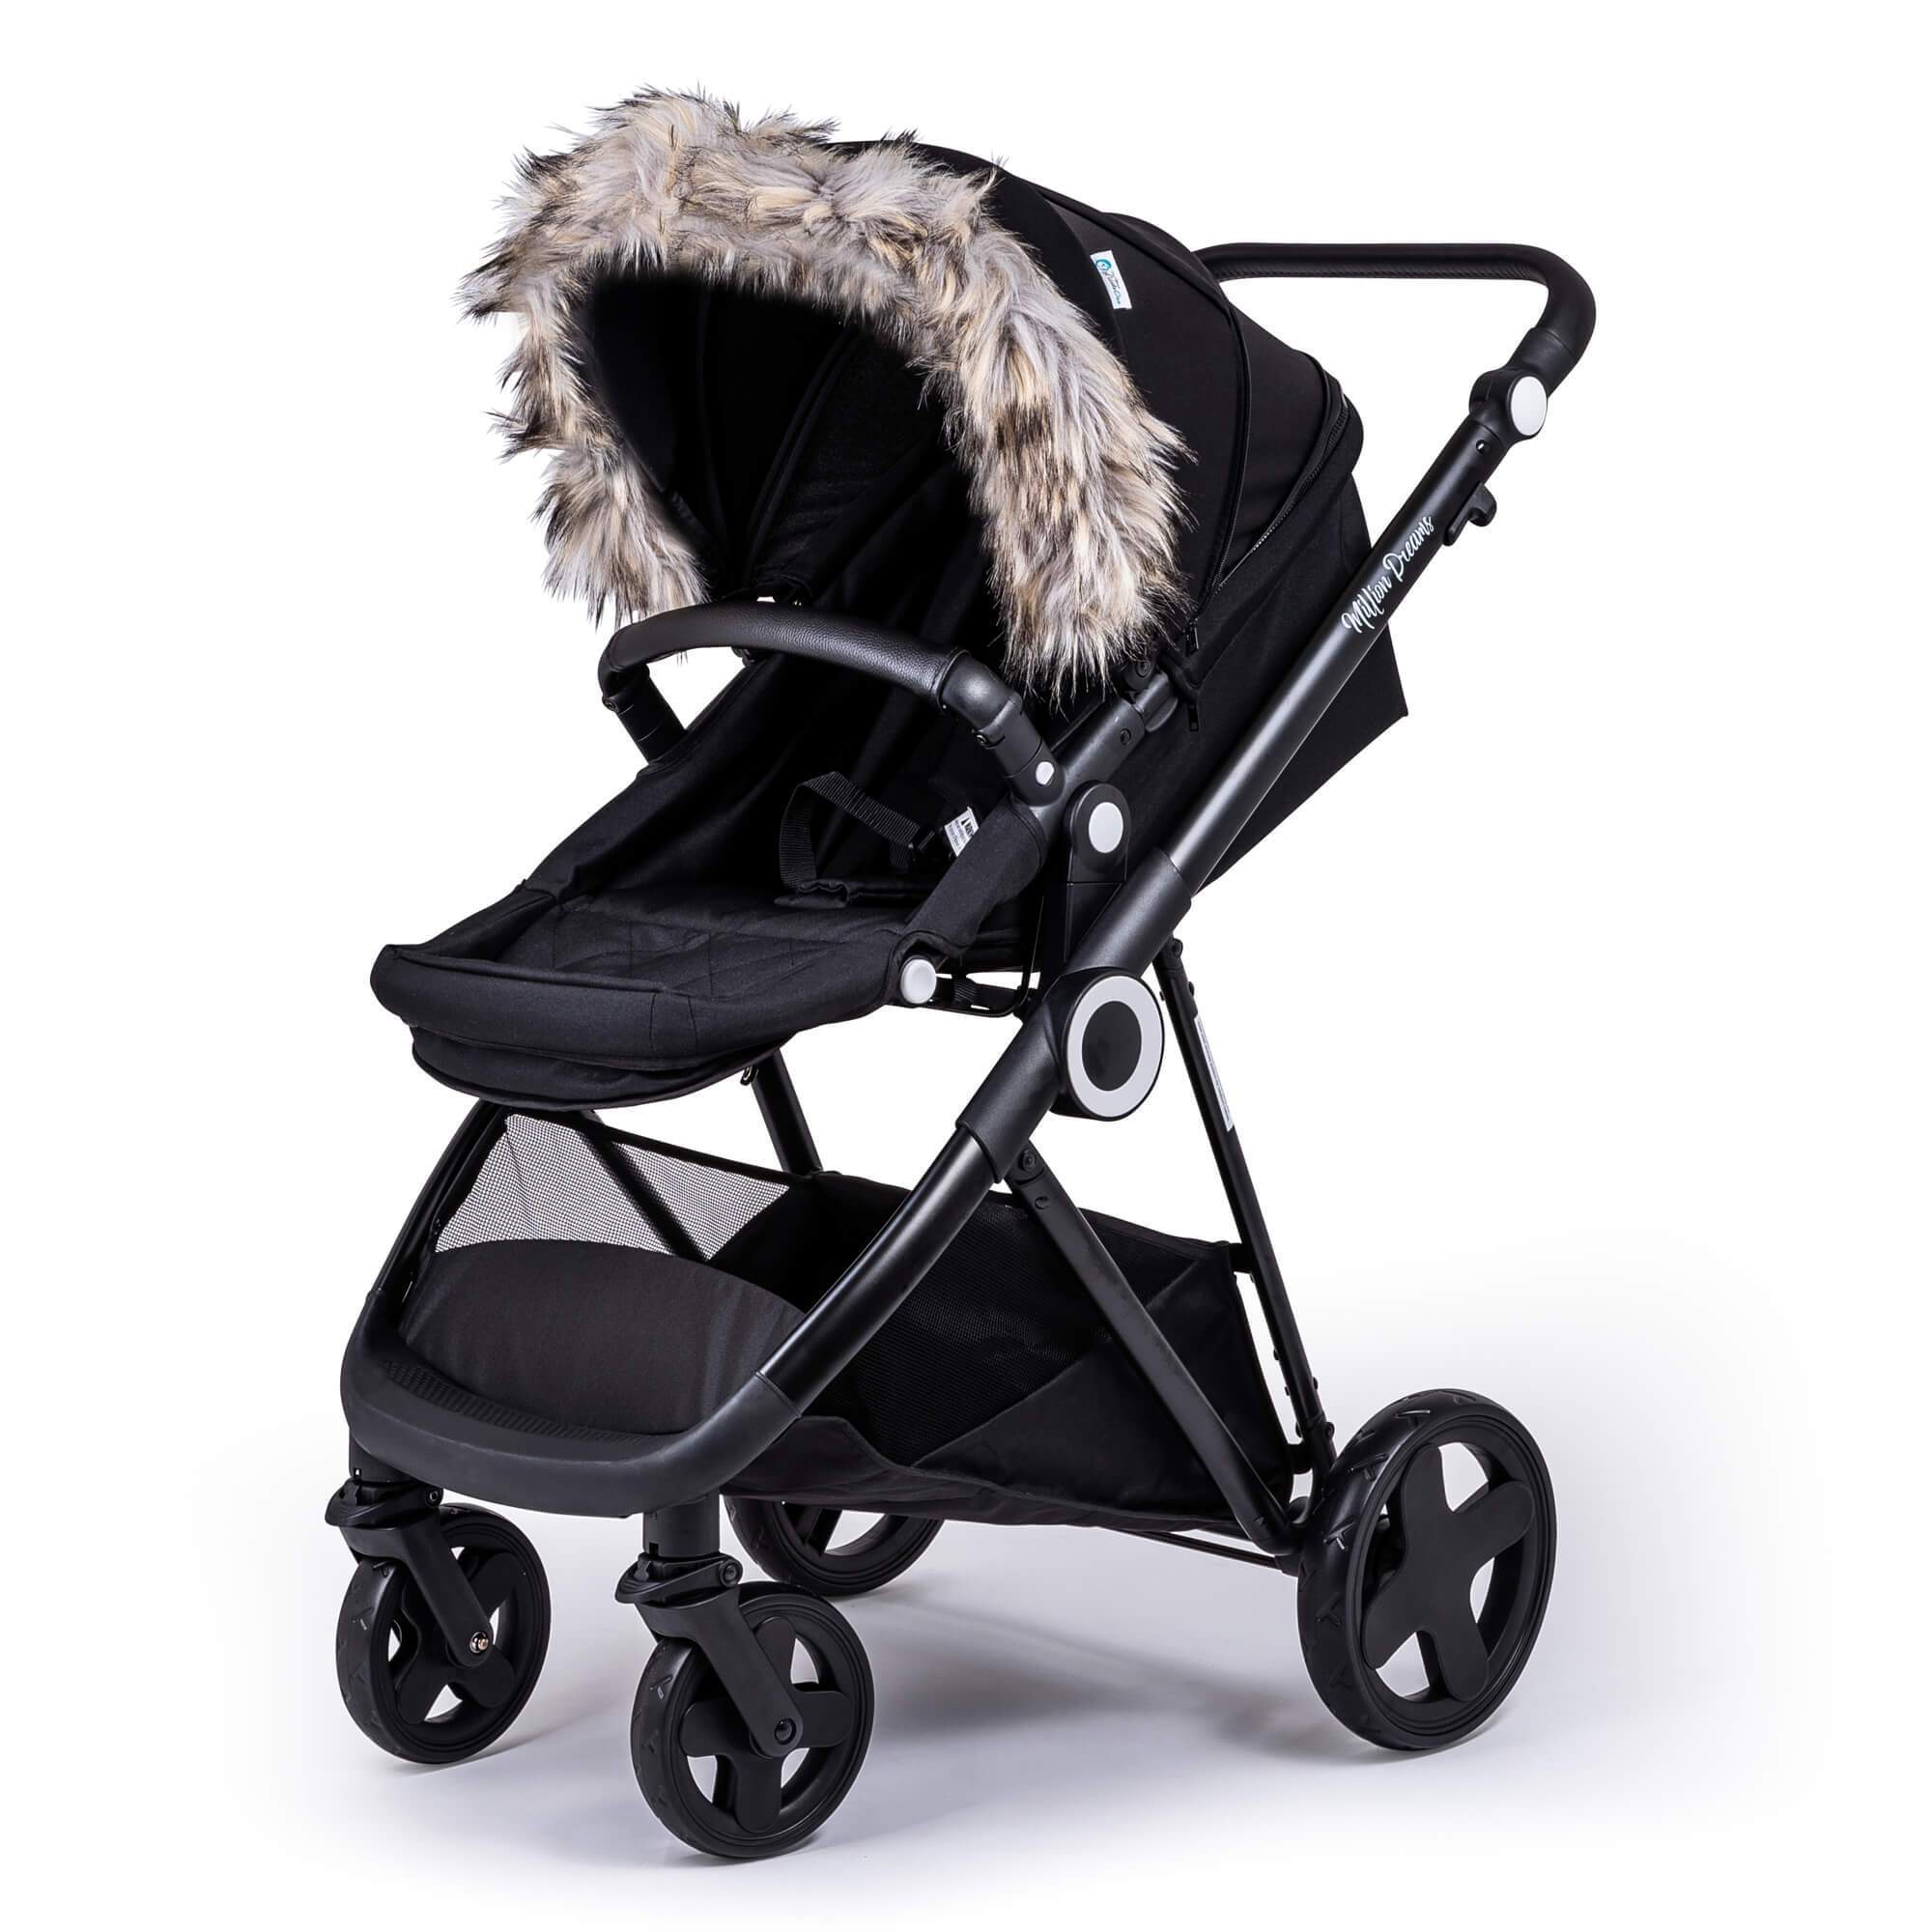 Pram Fur Hood Trim Attachment for Pushchair Compatible with Little Shield - Light Grey / Fits All Models | For Your Little One